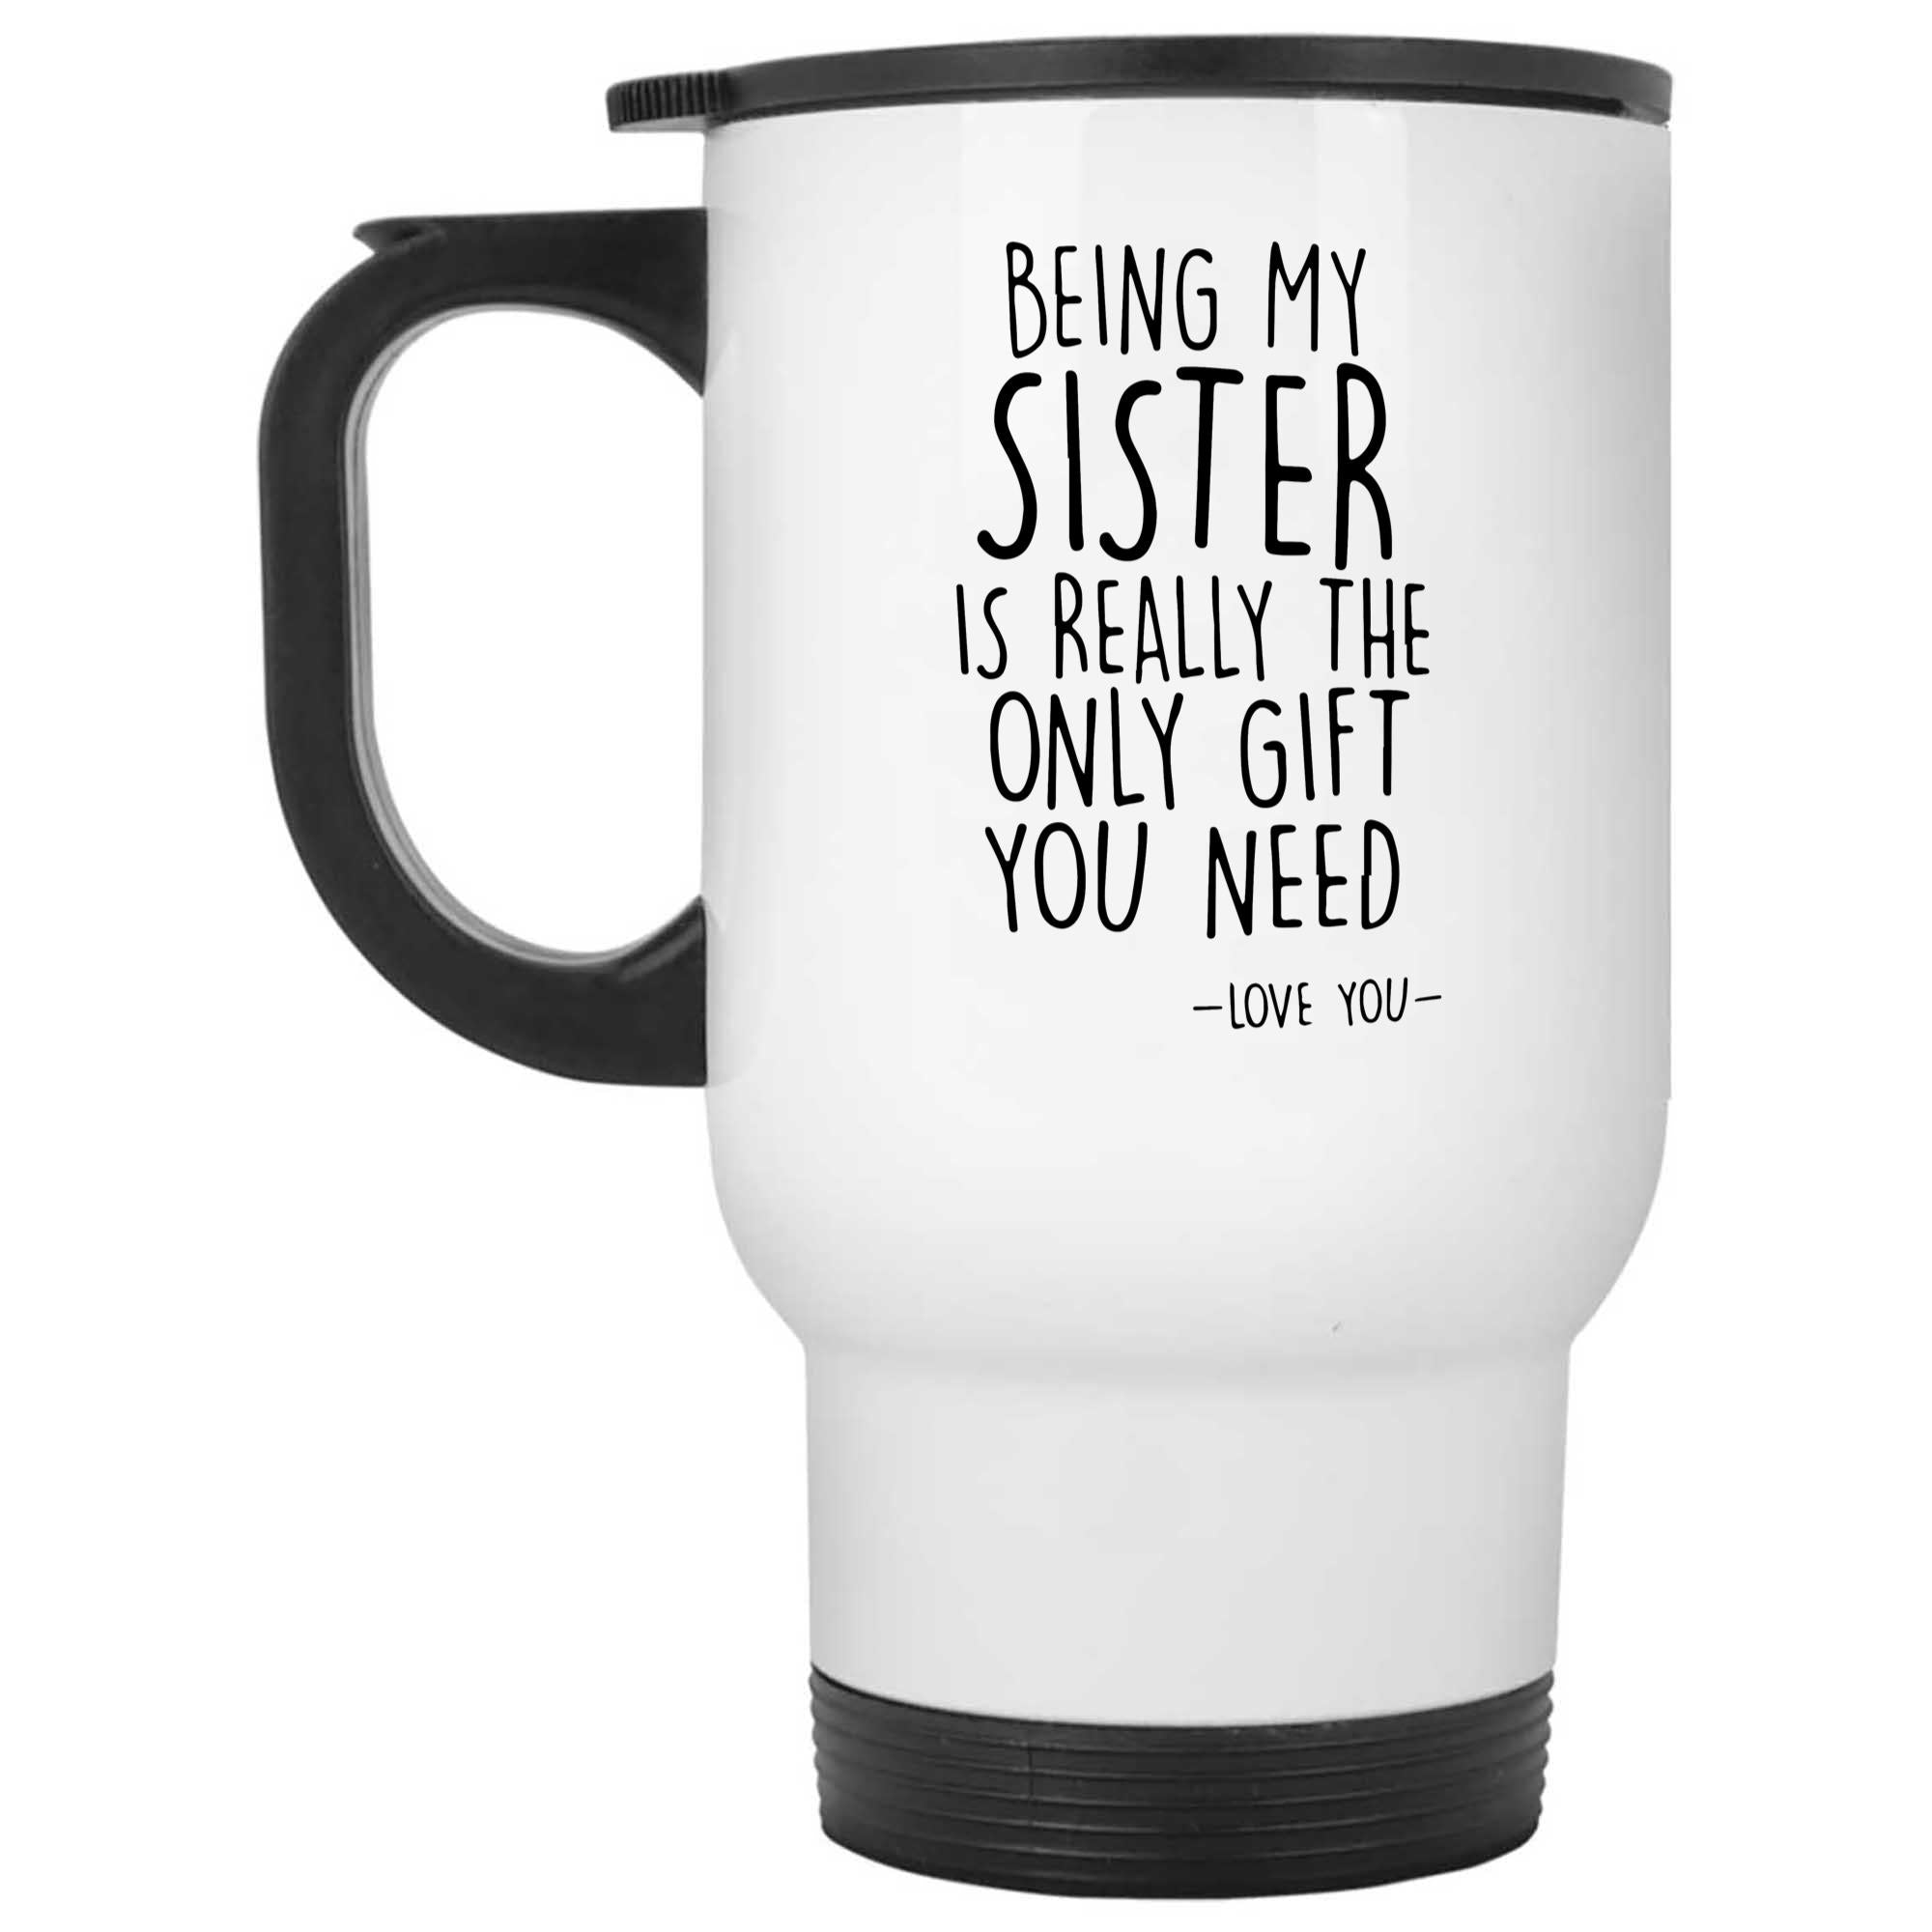 Skitongifts Funny Ceramic Novelty Coffee Mug Being My Sister Is Really The Only Gift You Need - Love You Sister Funny vEm8ukP